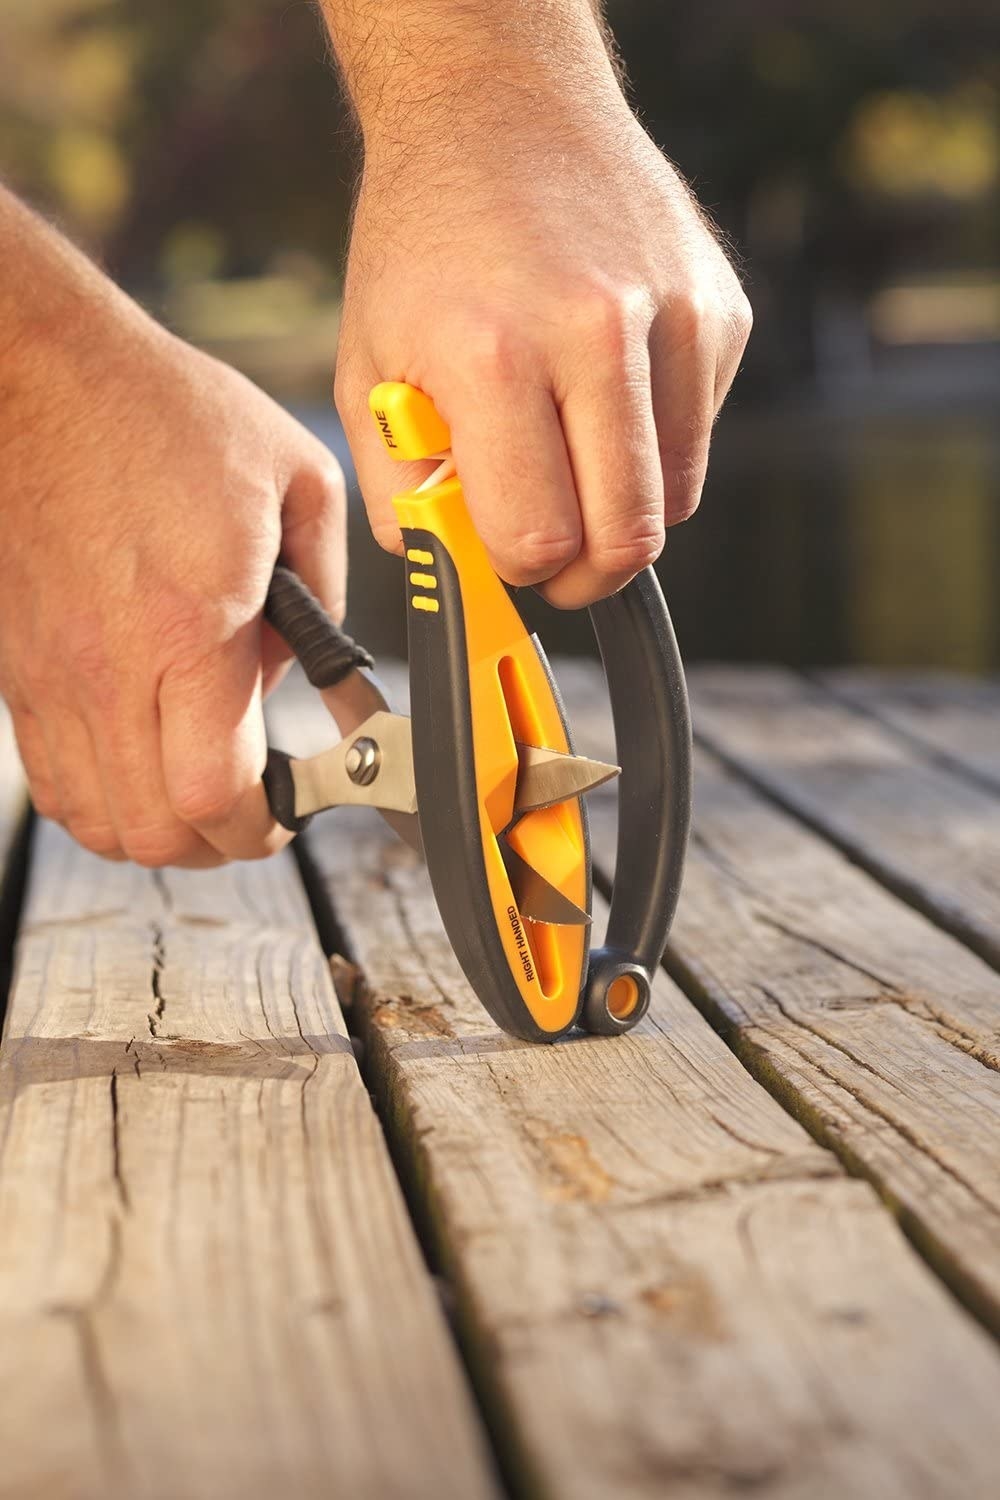 person using the sharpener outdoors to sharpen a pair of scissors